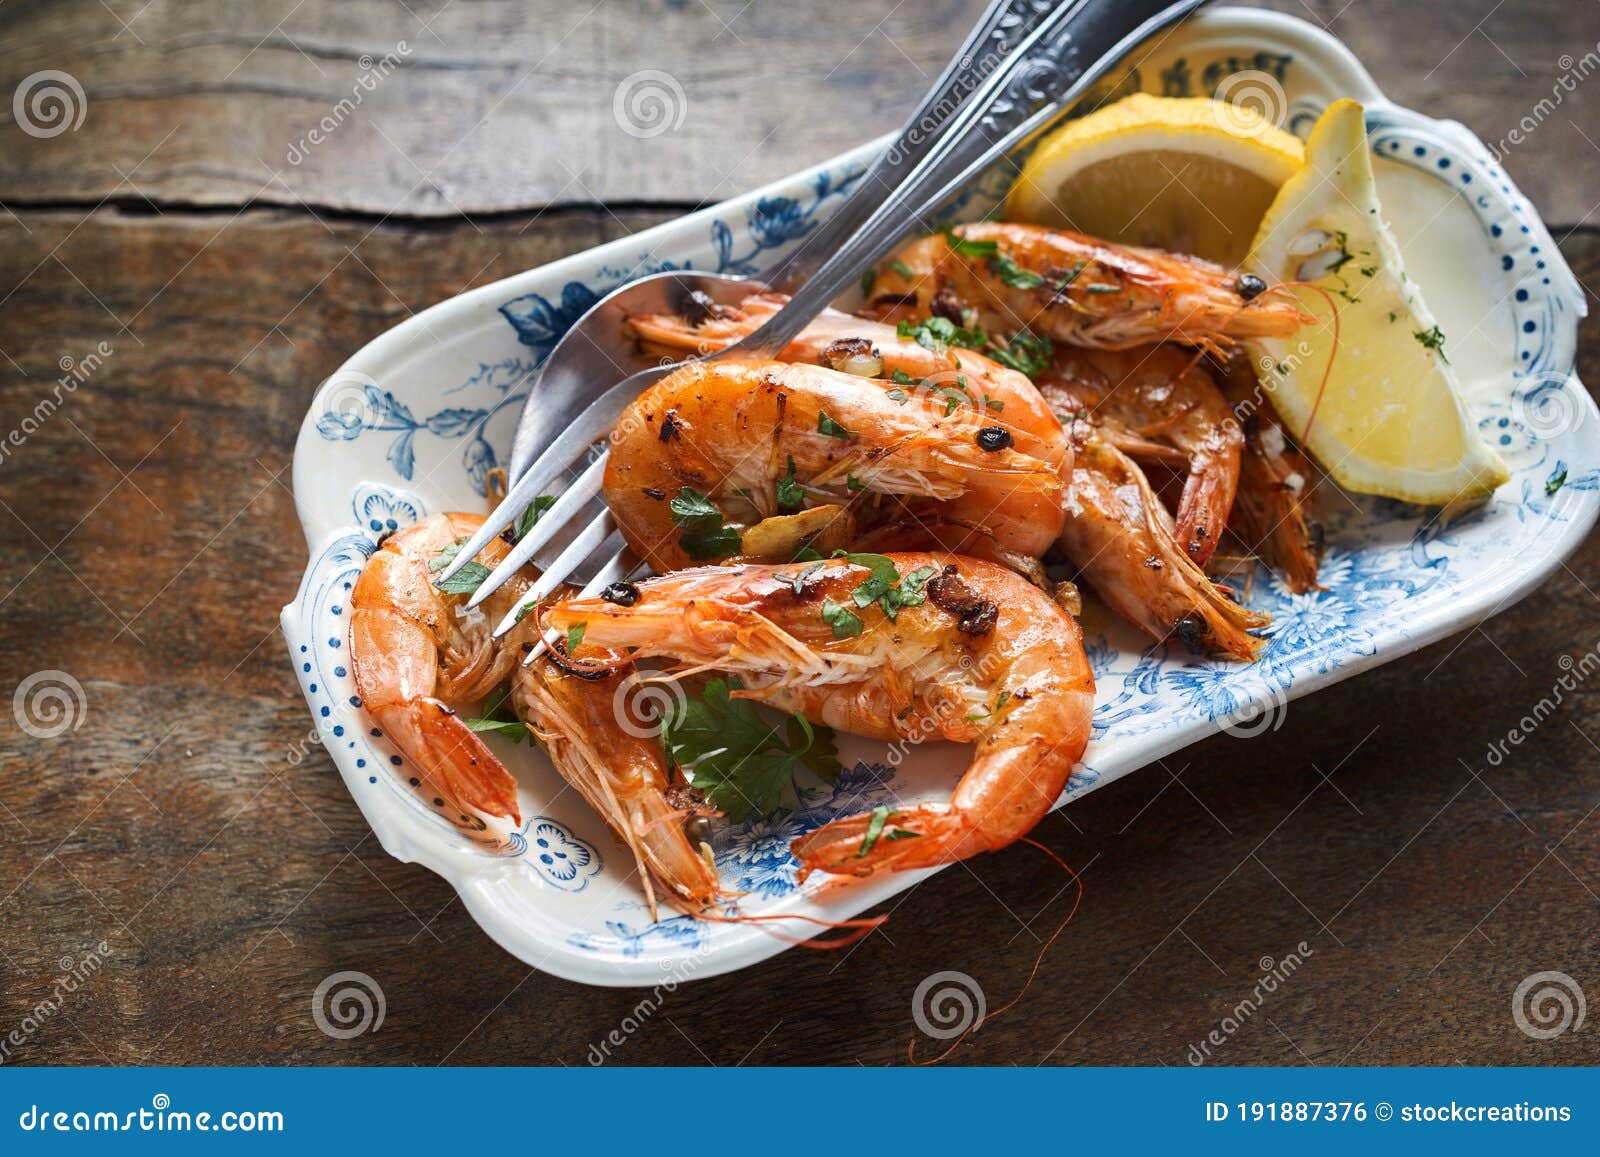 seafood appetizer of spicy whole grilled prawns